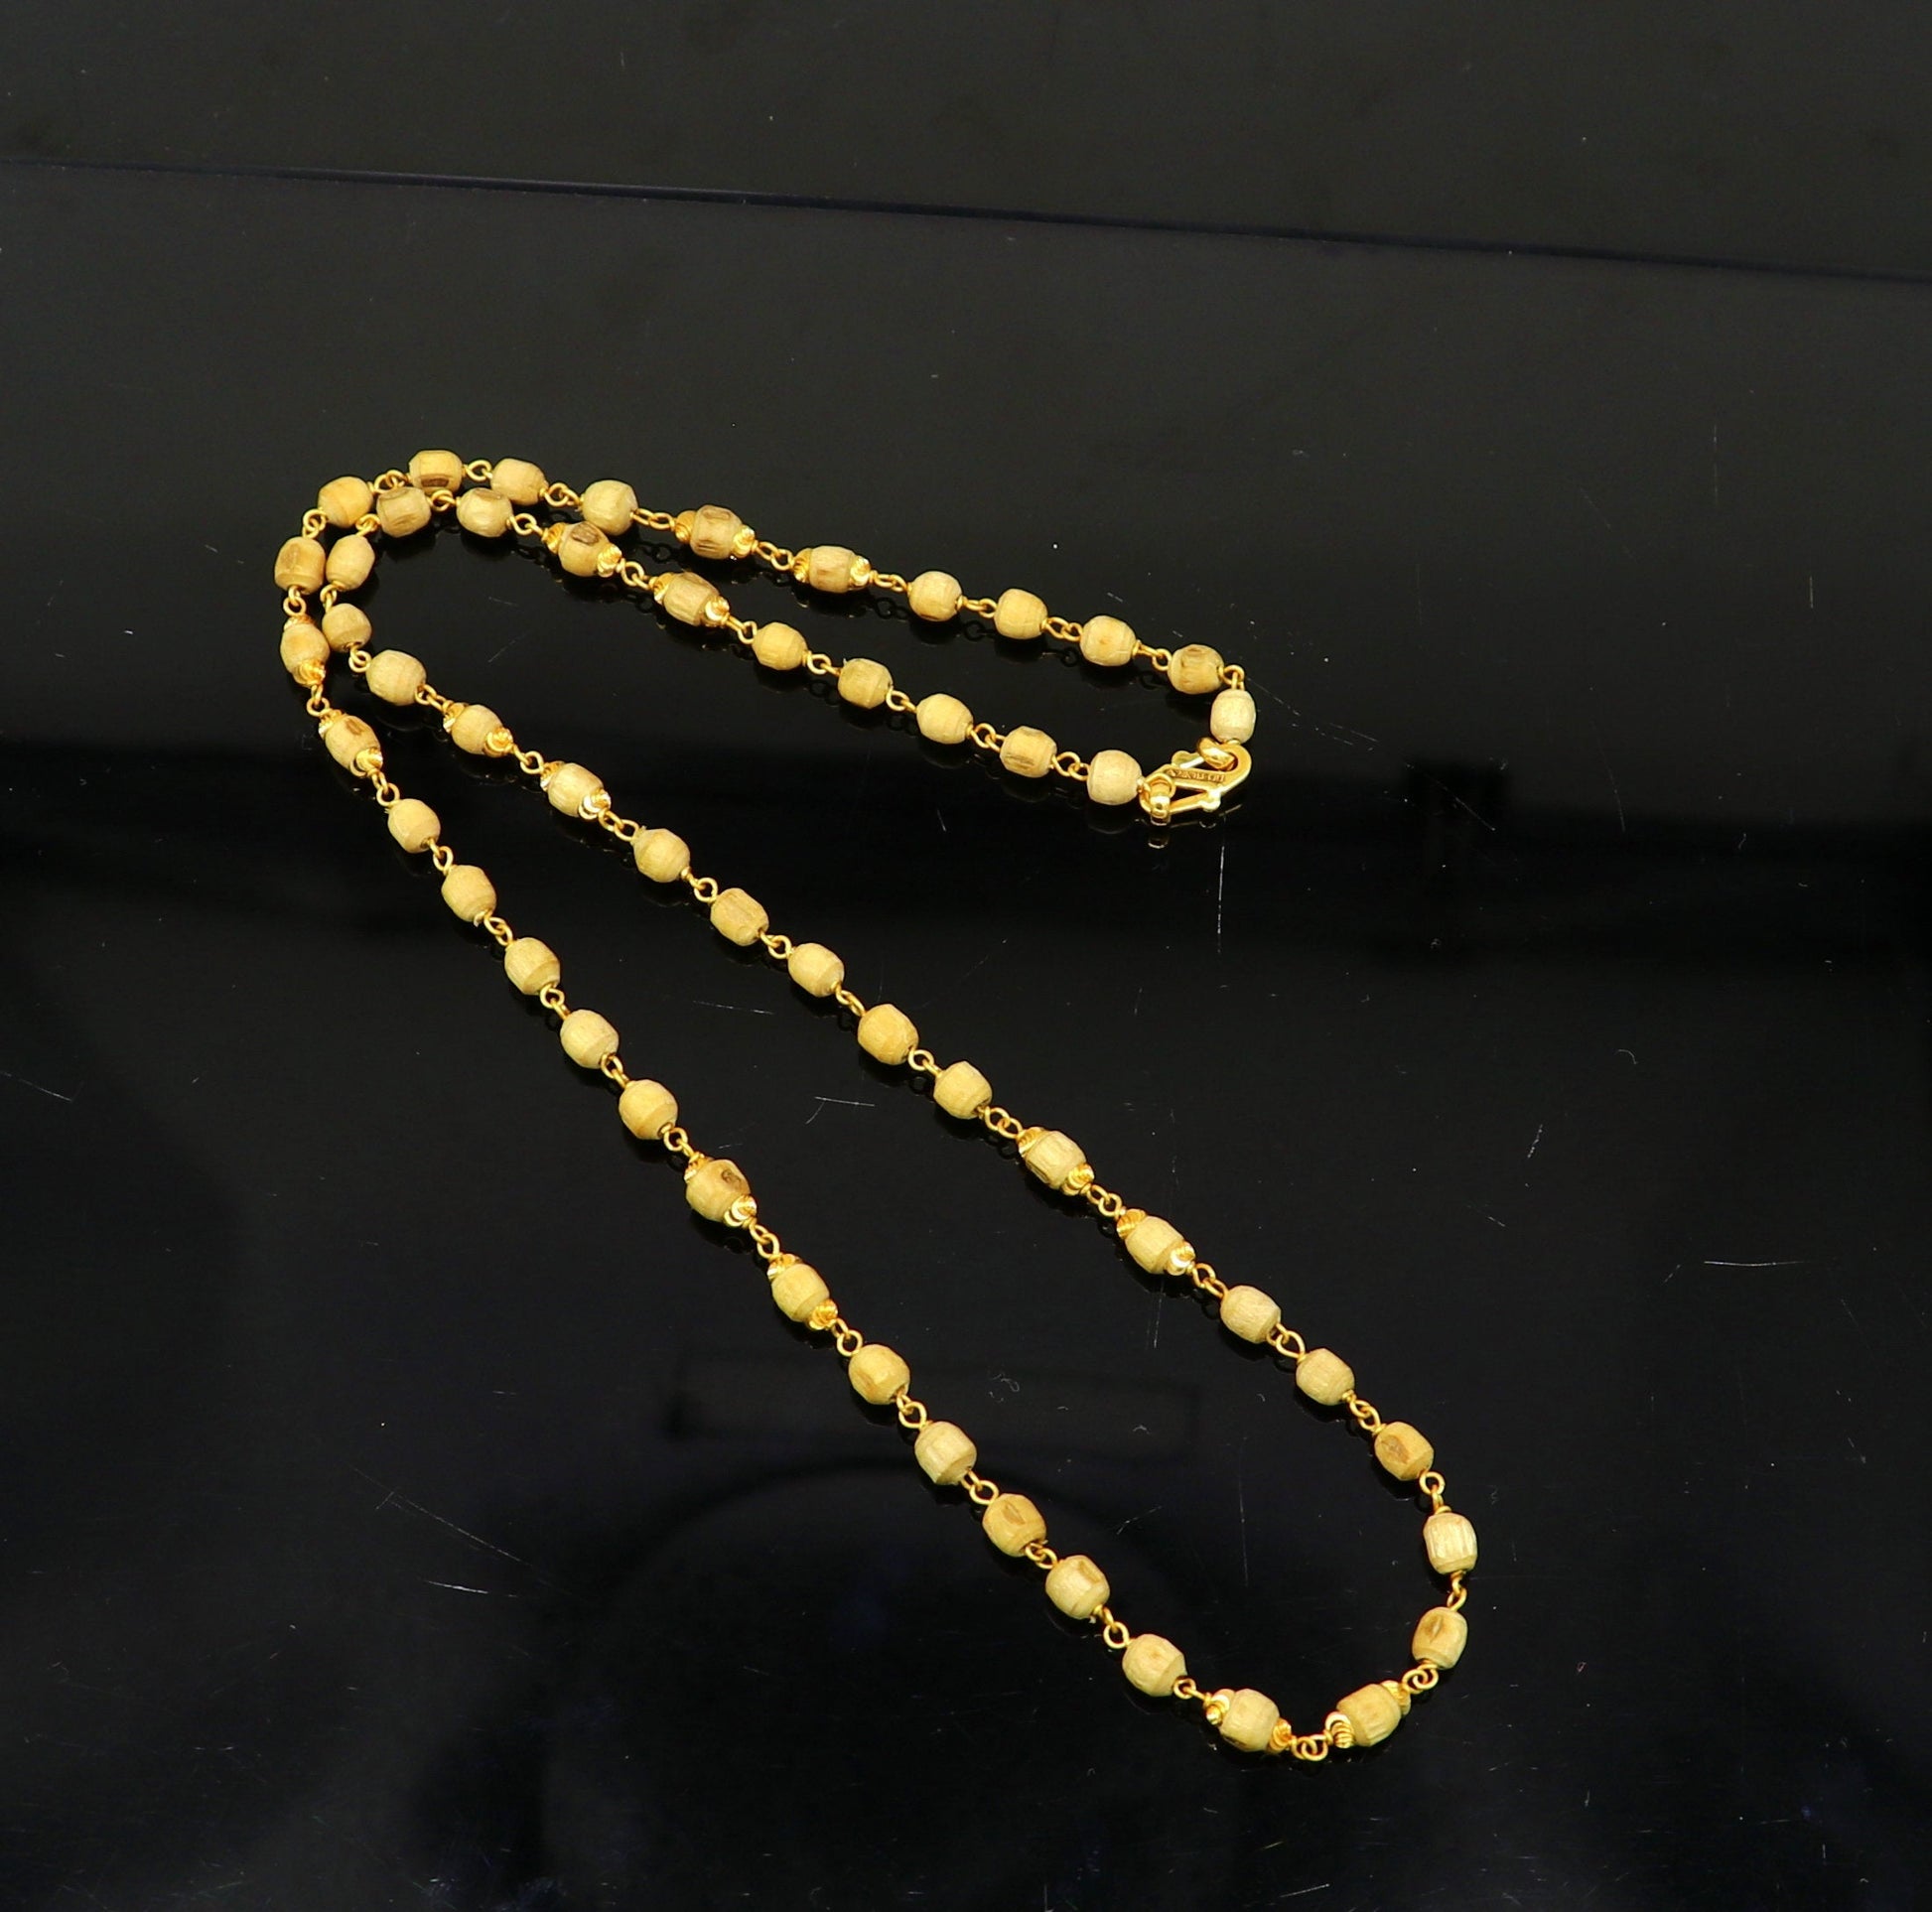 22kt yellow gold handmade customized basil rosary wooden beads chain necklace, gorgeous personalized tulsi chain, unisex stylish gifting - TRIBAL ORNAMENTS